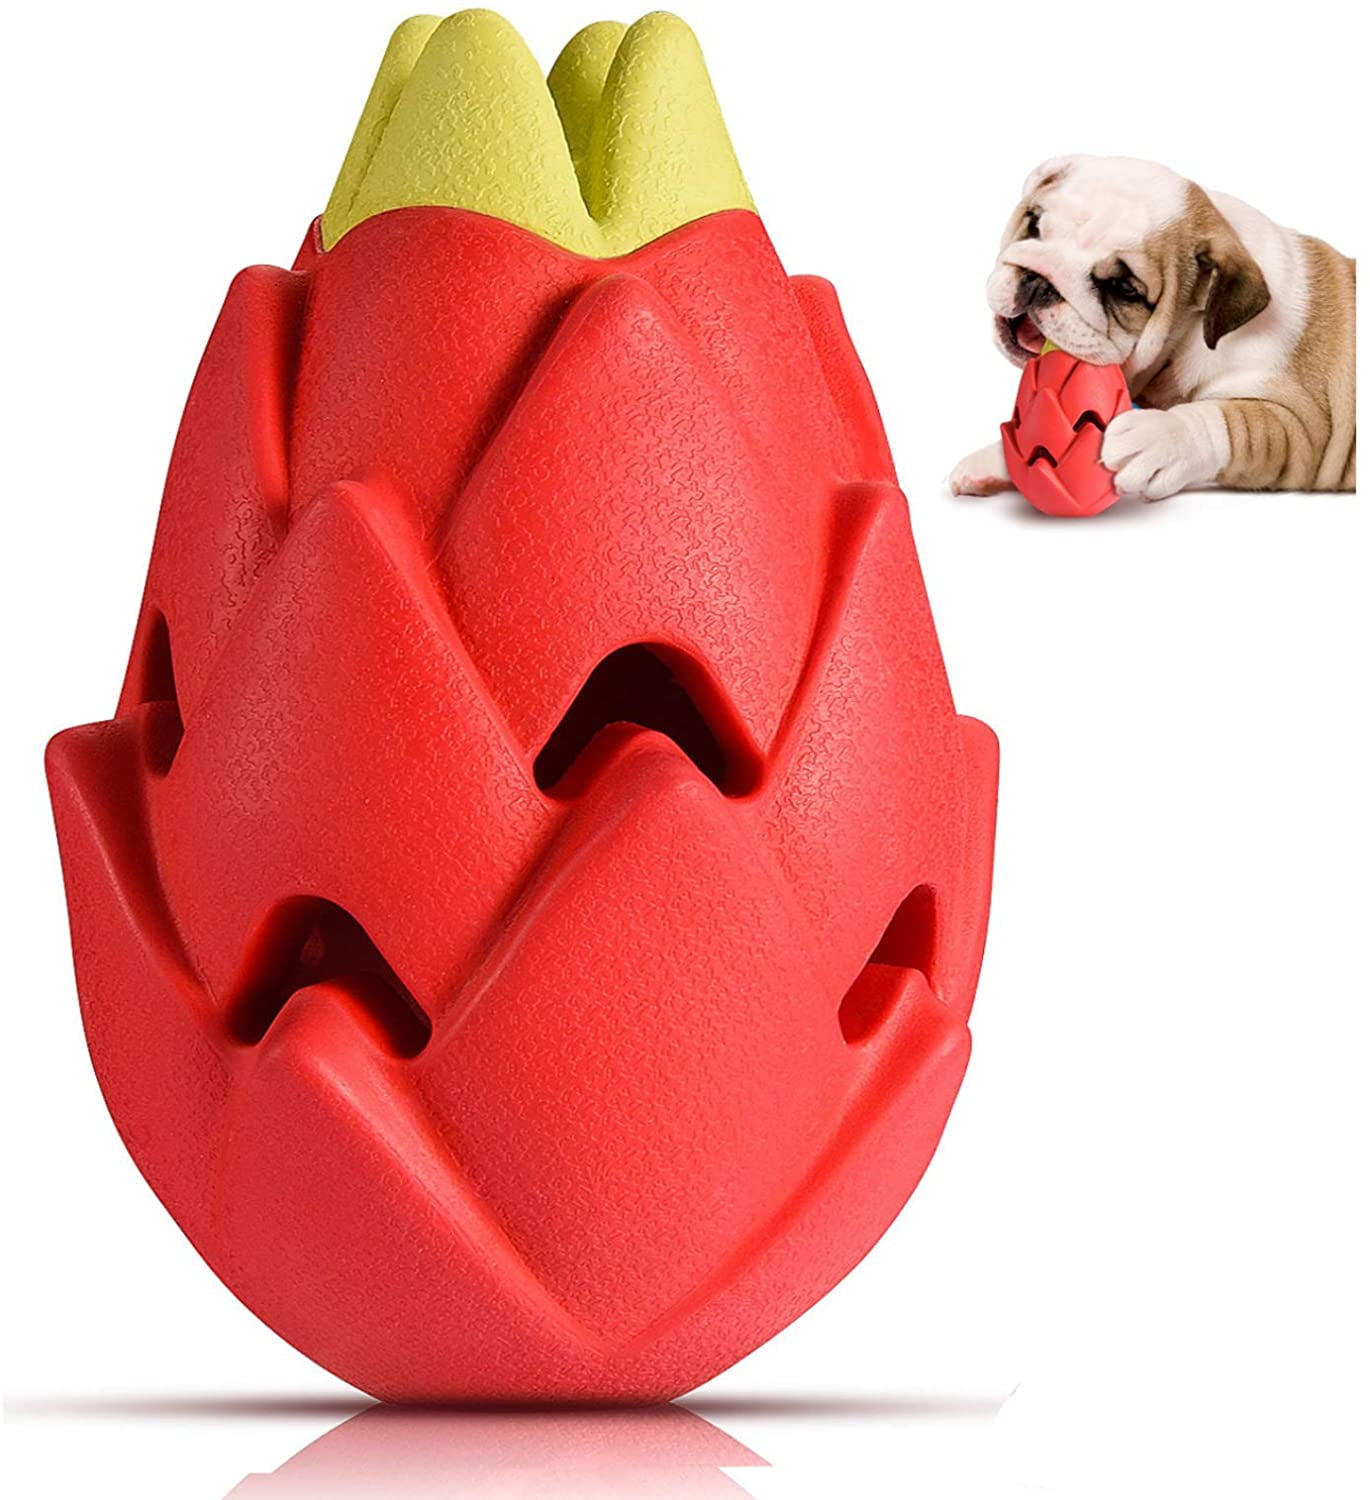 SPOT Play Strong S Bone Dog Chew Toys For Aggressive Chewers Indestructible Dog Toys Dog Chew Toy Dog Toys For Aggressive Chewers Interactive Dog Toy Chew Toys For Aggressive Dogs Bone